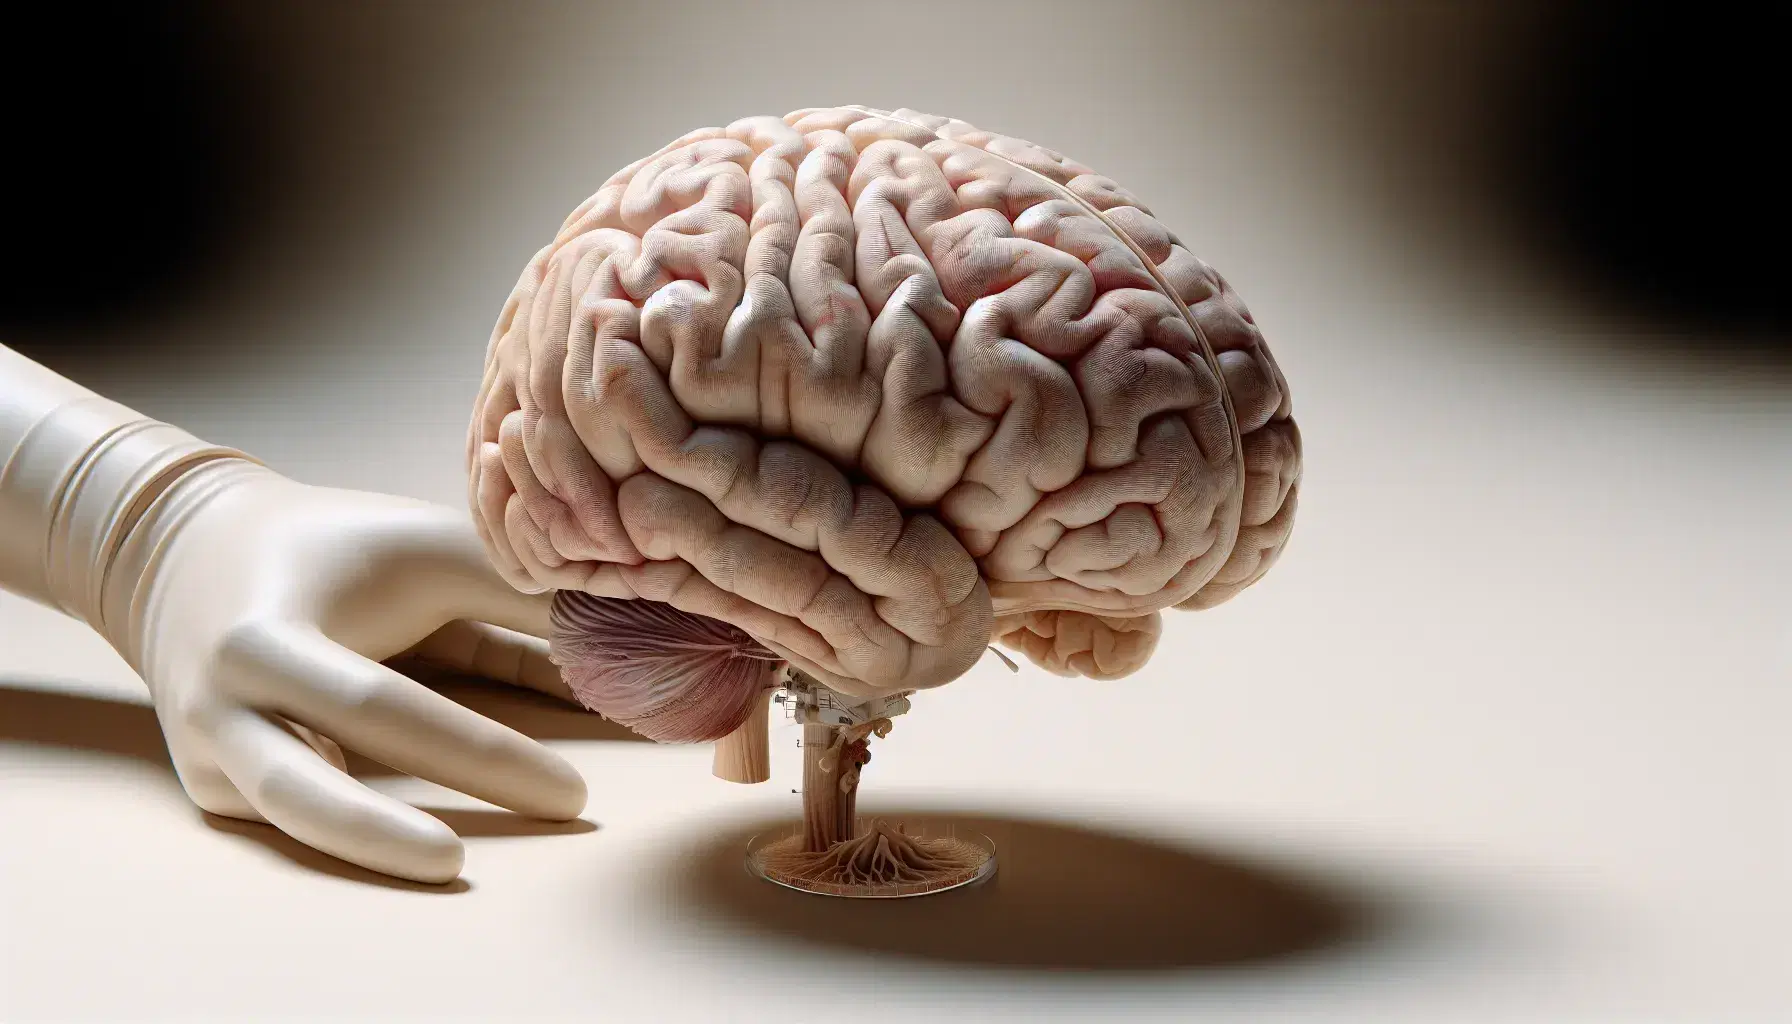 Accurate three-dimensional model of the human brain with visible left hemisphere, gloved hands supporting it on a neutral background.